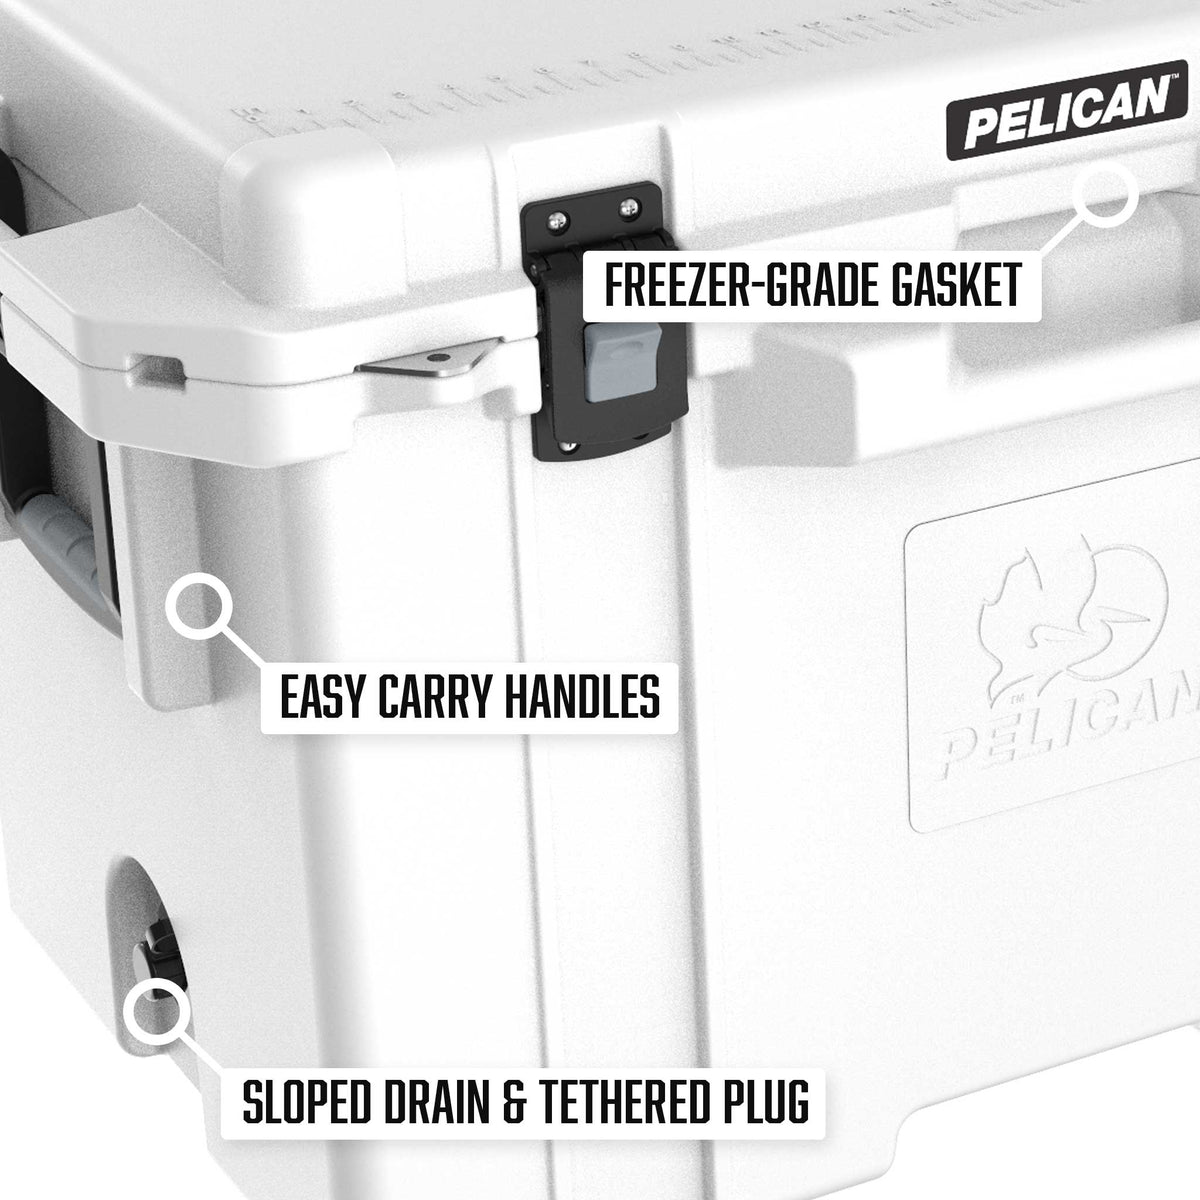 Pelican™ 250QT Elite Cooler comes with a sloped drain &amp; tethered plug, two sets of easy to use handles, and a freezer grade gasket